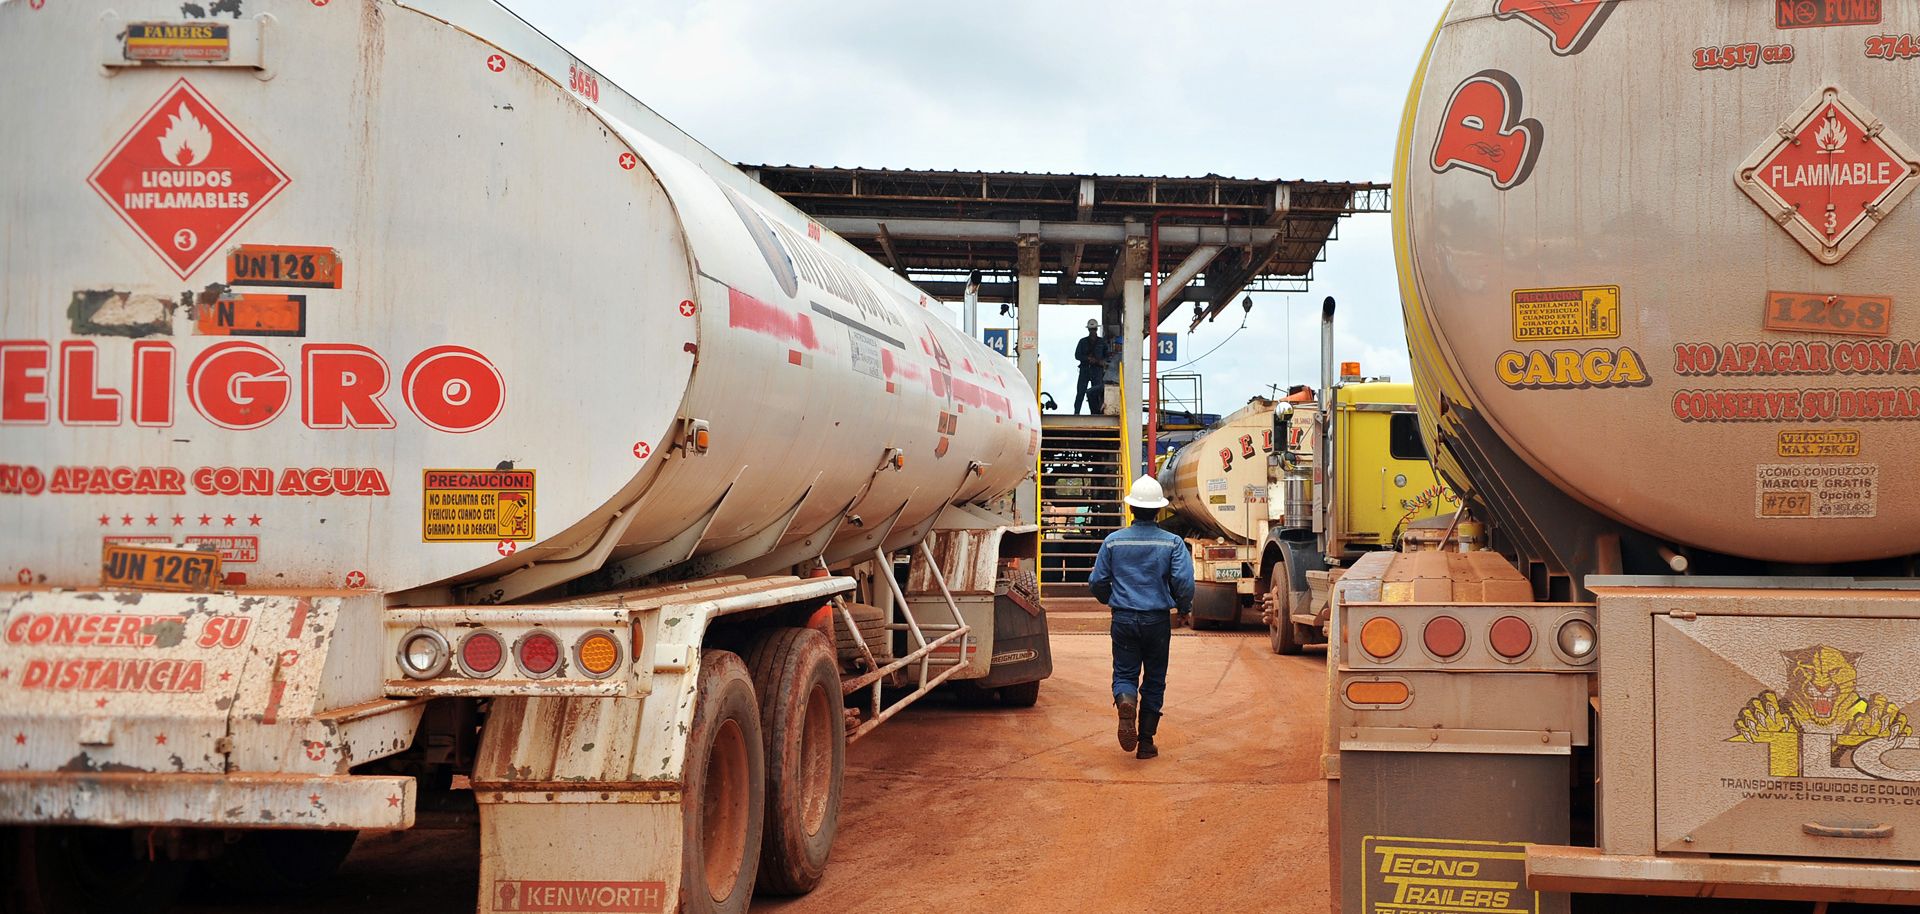 Tankers wait at Colombia's Rubiales oil field.